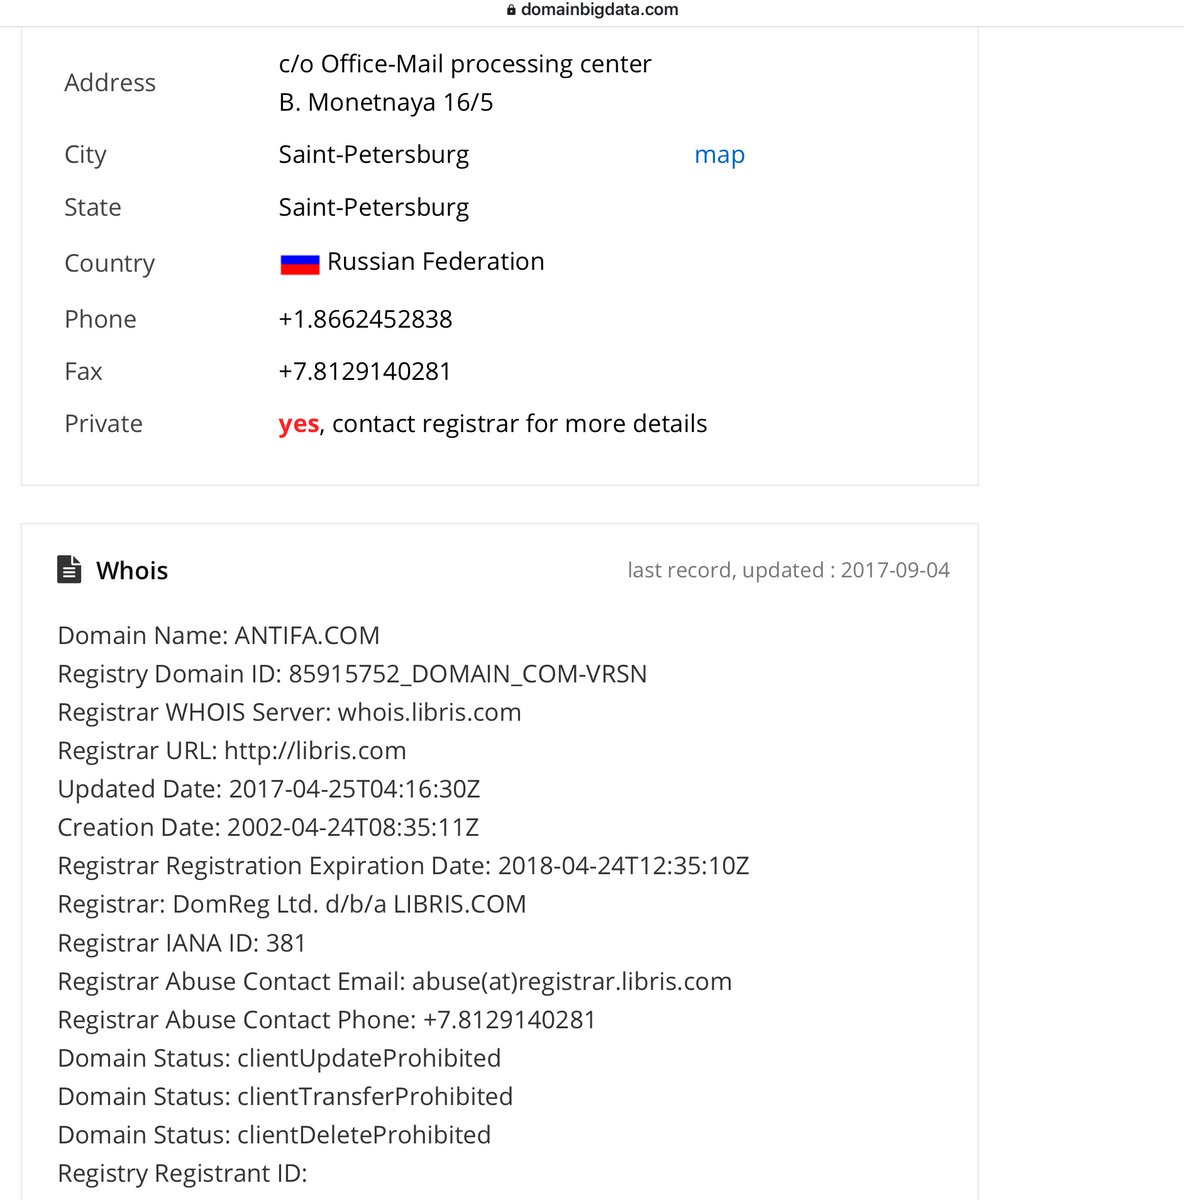 In sum and substance 2002 ANTIFA(.)com registered 2019 domain changesAugust 2020 domain now redirects to  @JoeBiden campaign & preliminary research suggest it’s in RussiaI am not an expert and I defer to those who are Any idea?ht  @MetroplexSocial https://domainbigdata.com/antifa.com 